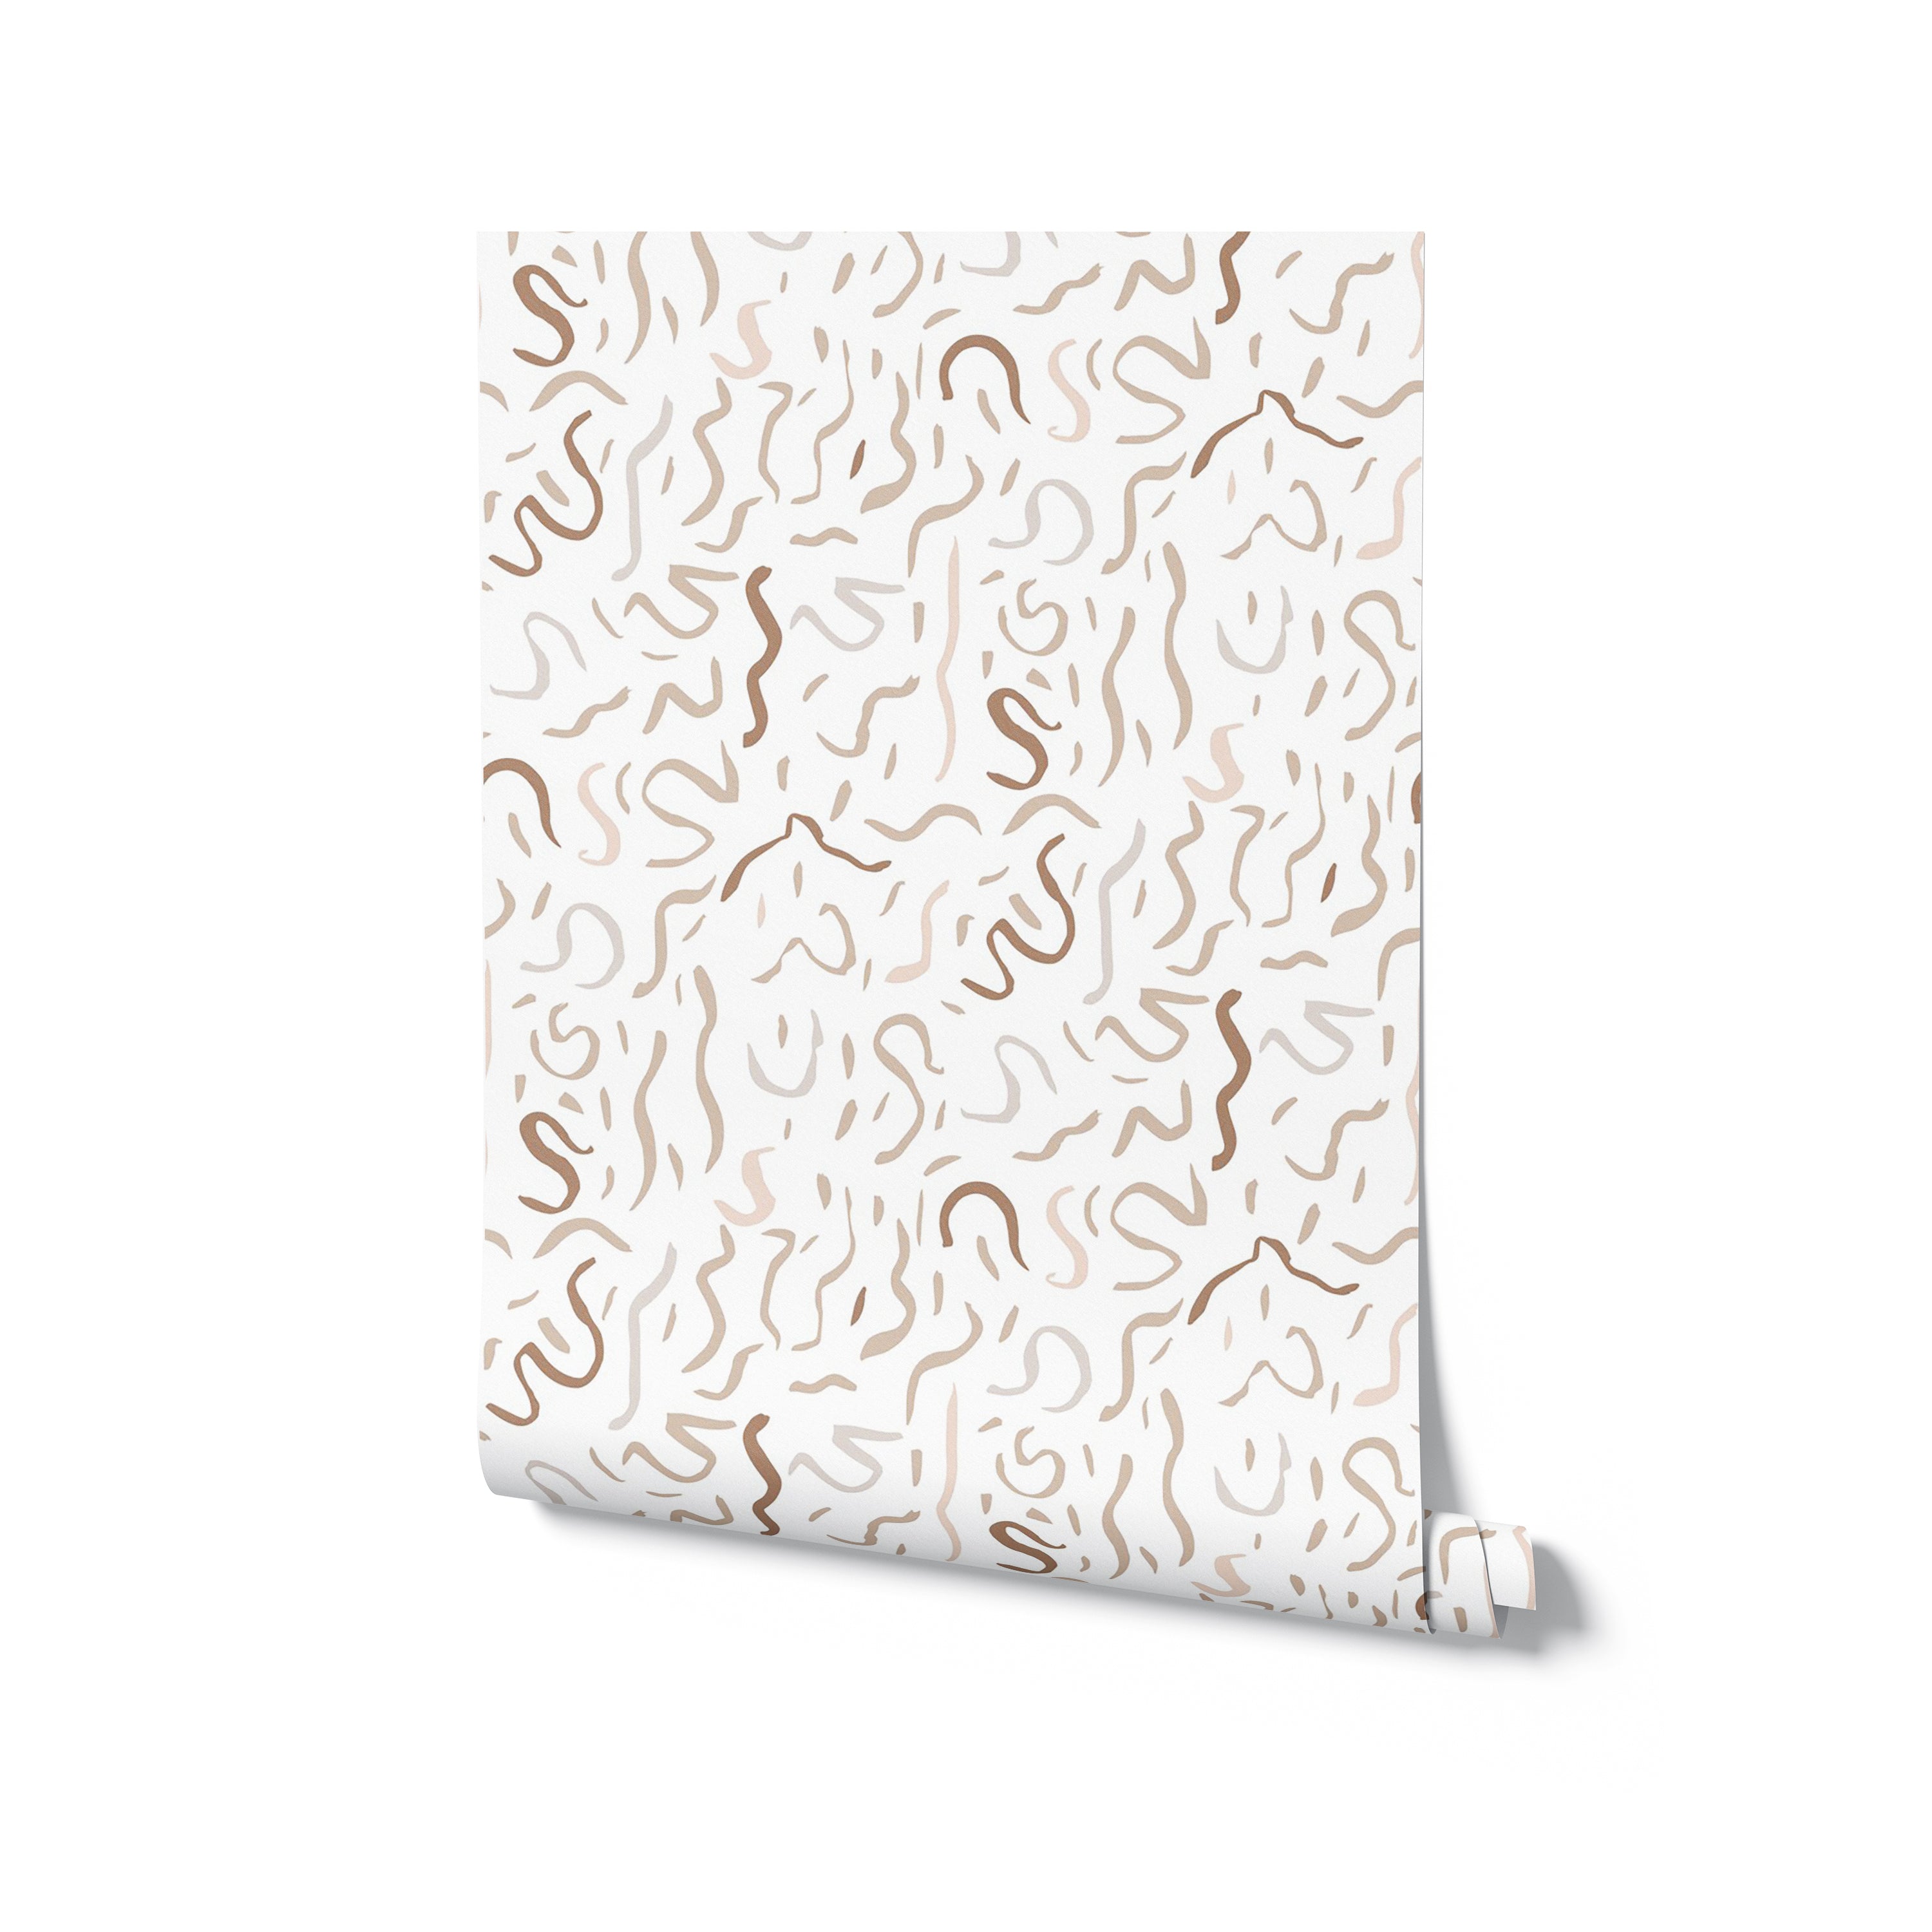 Rolled wallpaper with abstract brown and beige wavy pattern on a white background.